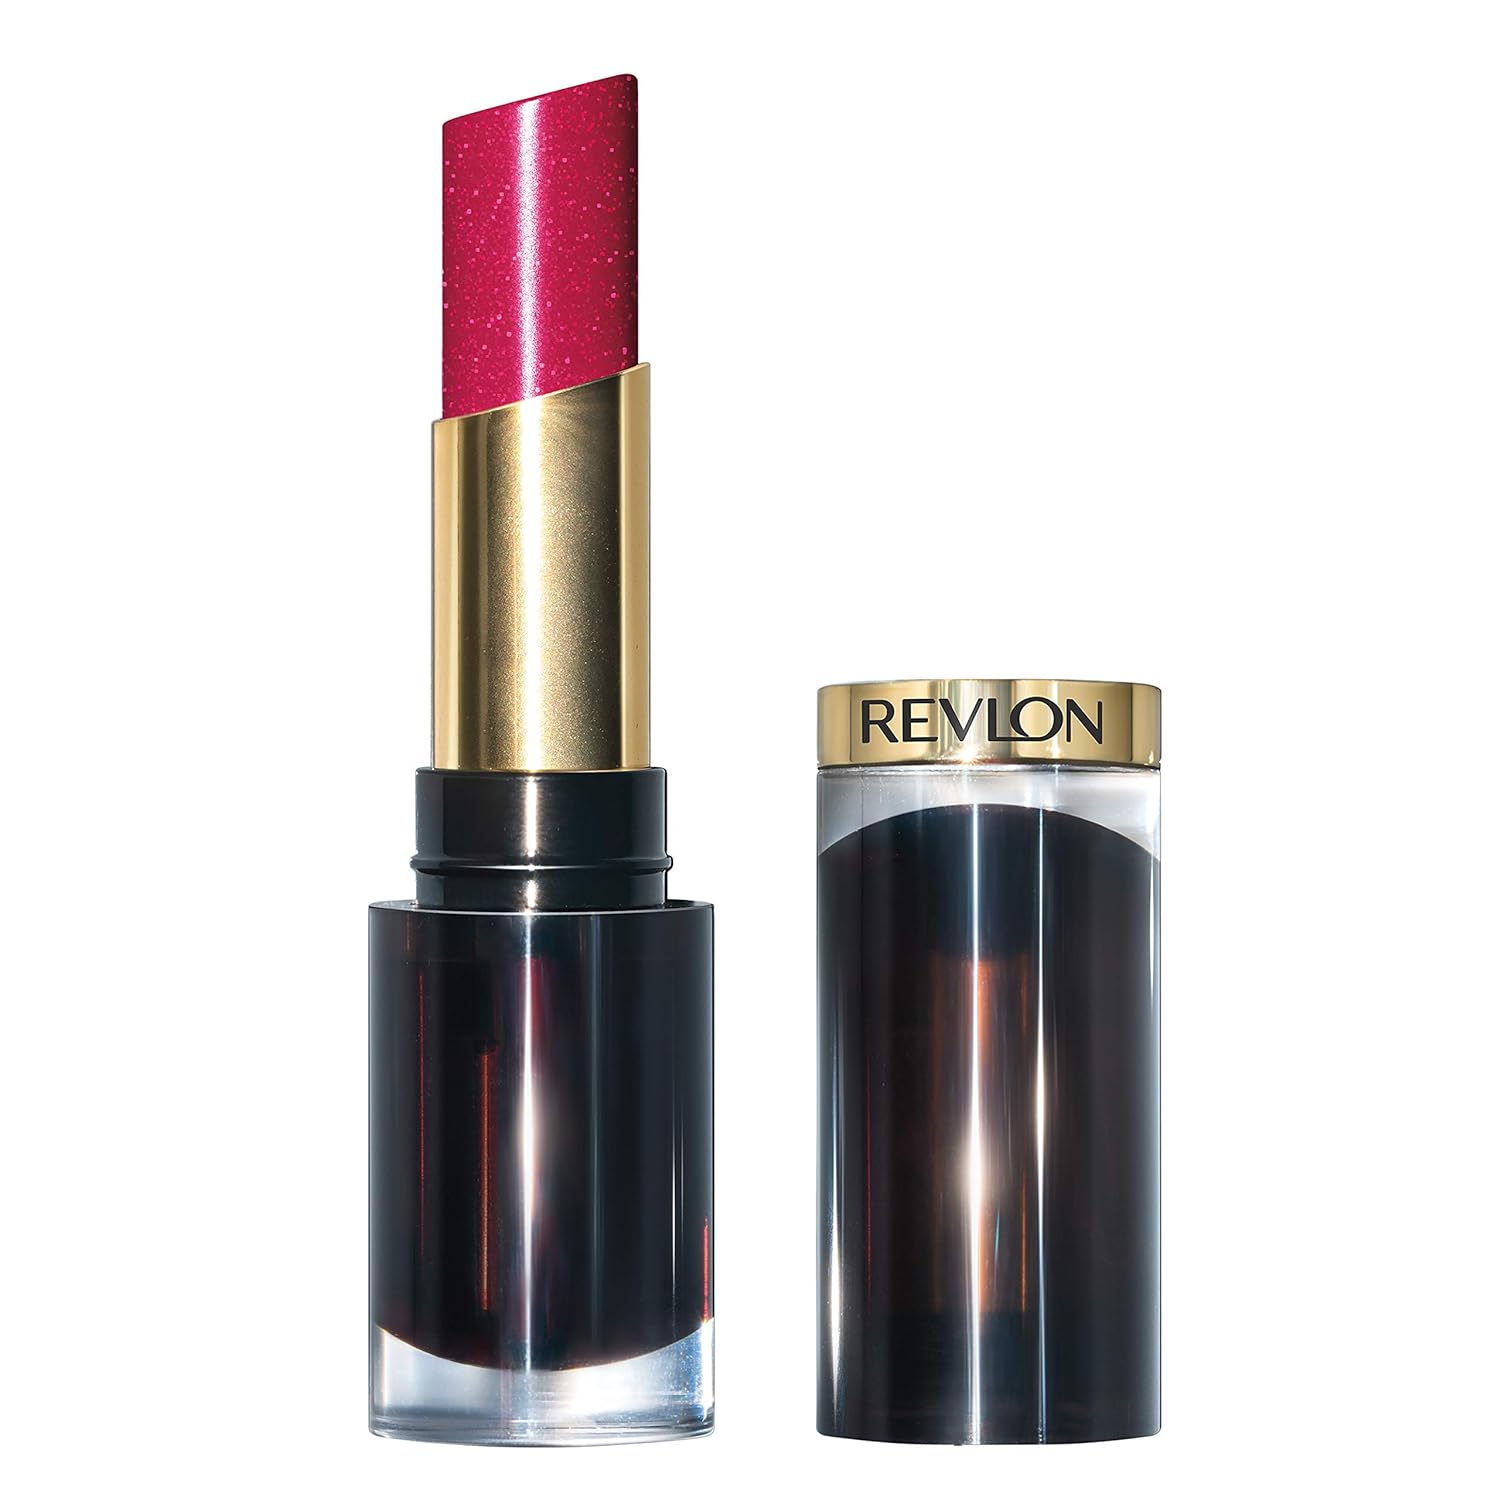 Revlon Super Lustrous Glass Shine Lipstick, High Gloss Lipstick with Moisturising Creamy Formula Enriched with Hyaluronic Acid, Aloe and Rose Quartz, 030 Love is on, 3.1g